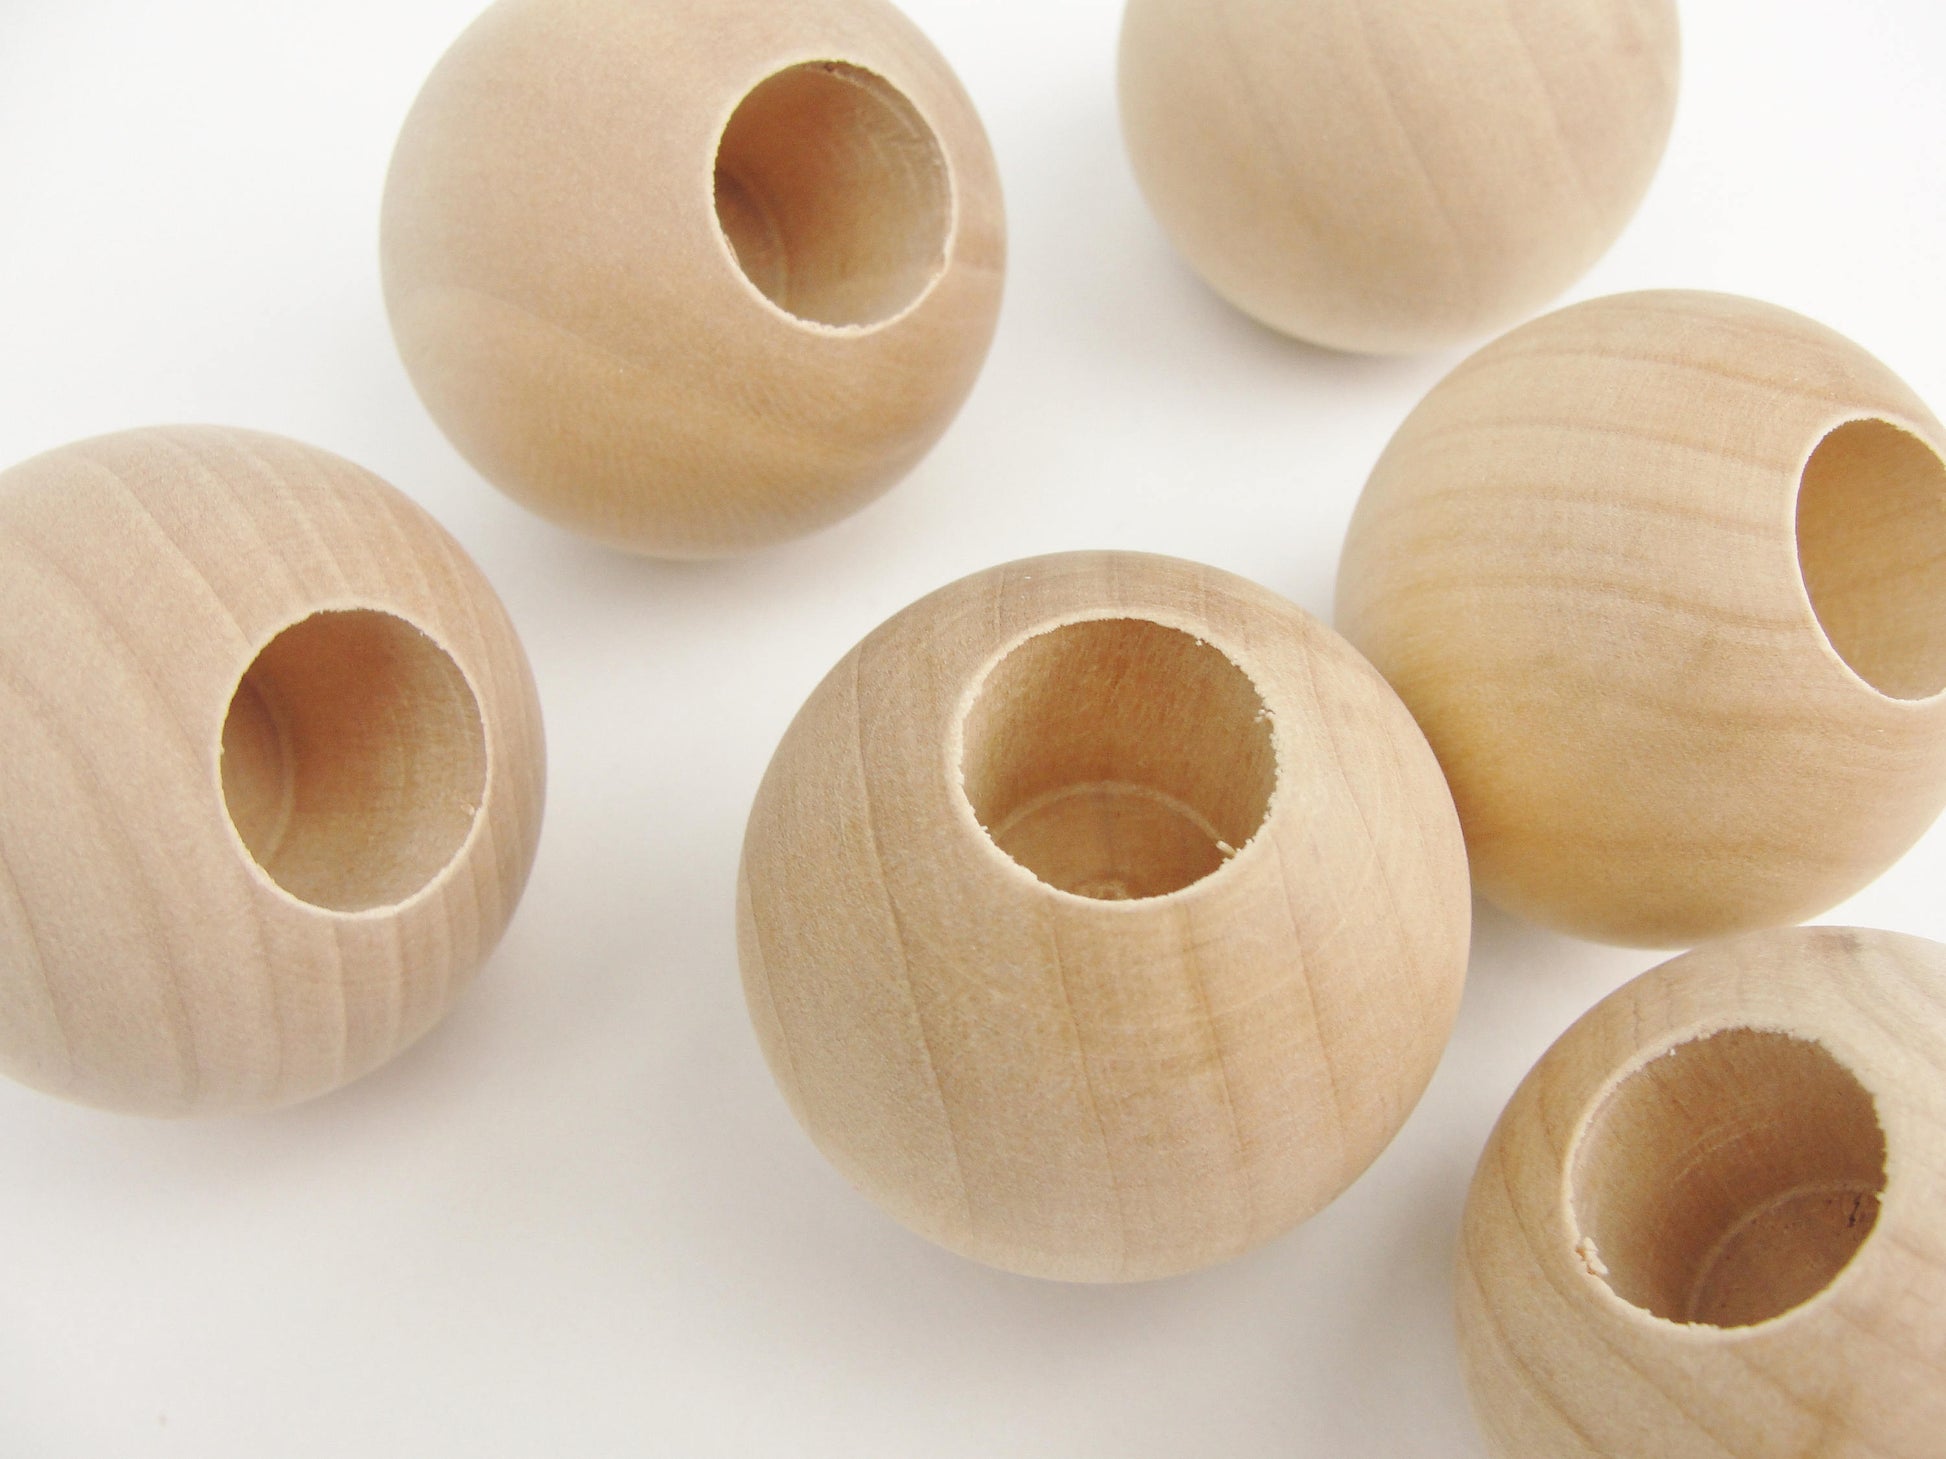 Wooden end cap ball 1.5"  end cap 19/32" hole set of 6 - Wood parts - Craft Supply House